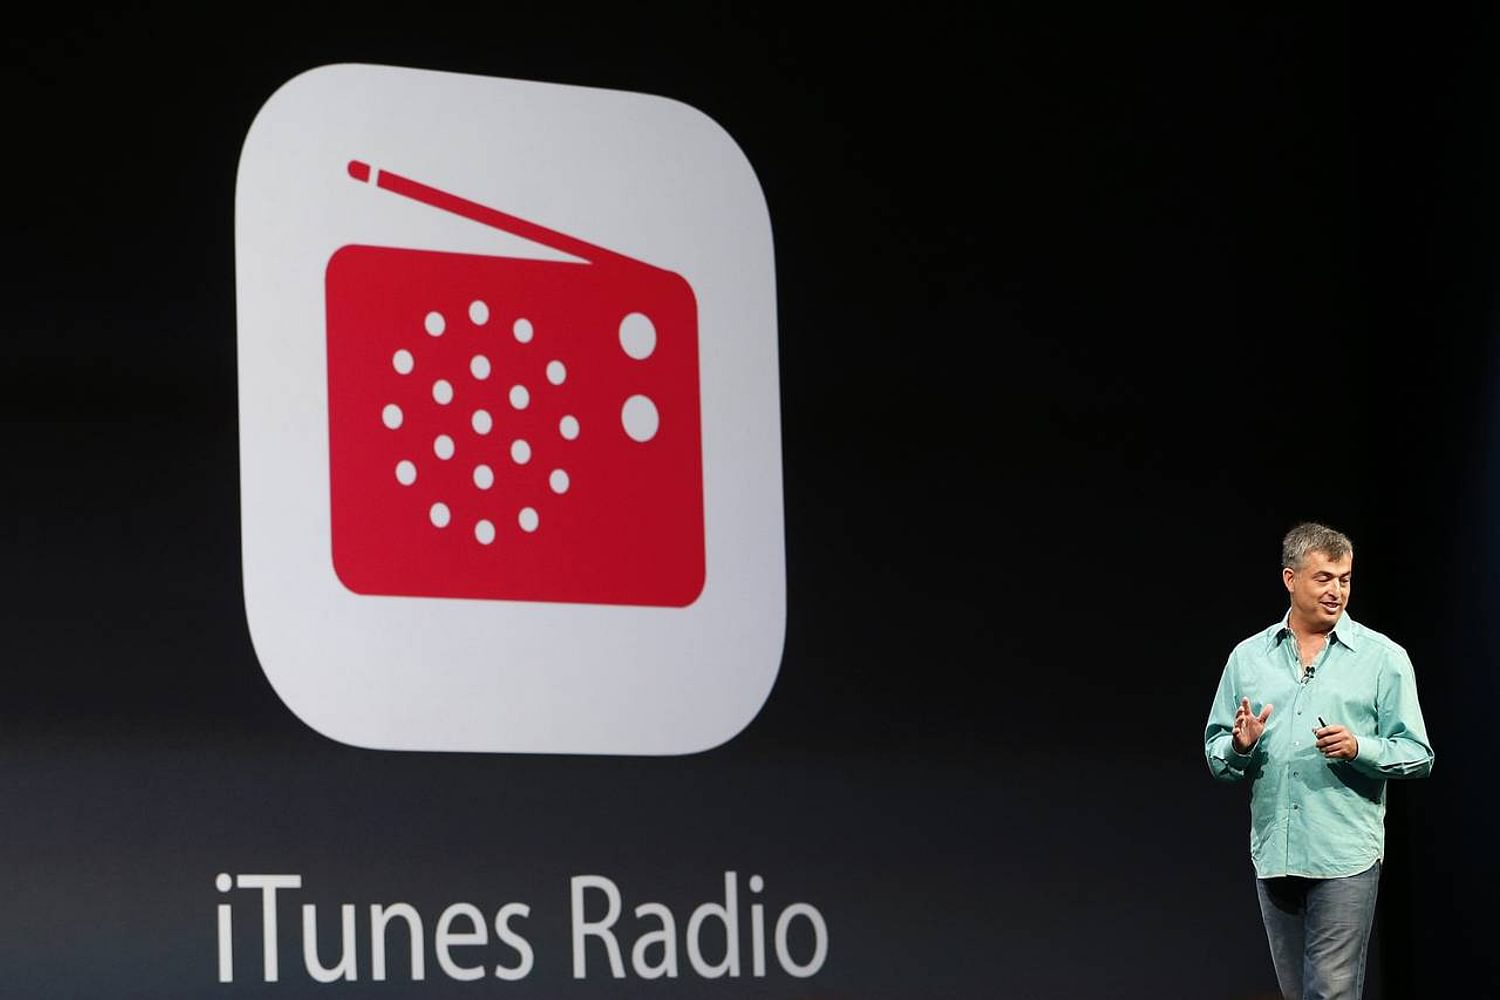 Drake, St. Vincent, and Disclosure to host shows on Apple Music’s ‘Beats 1’ station